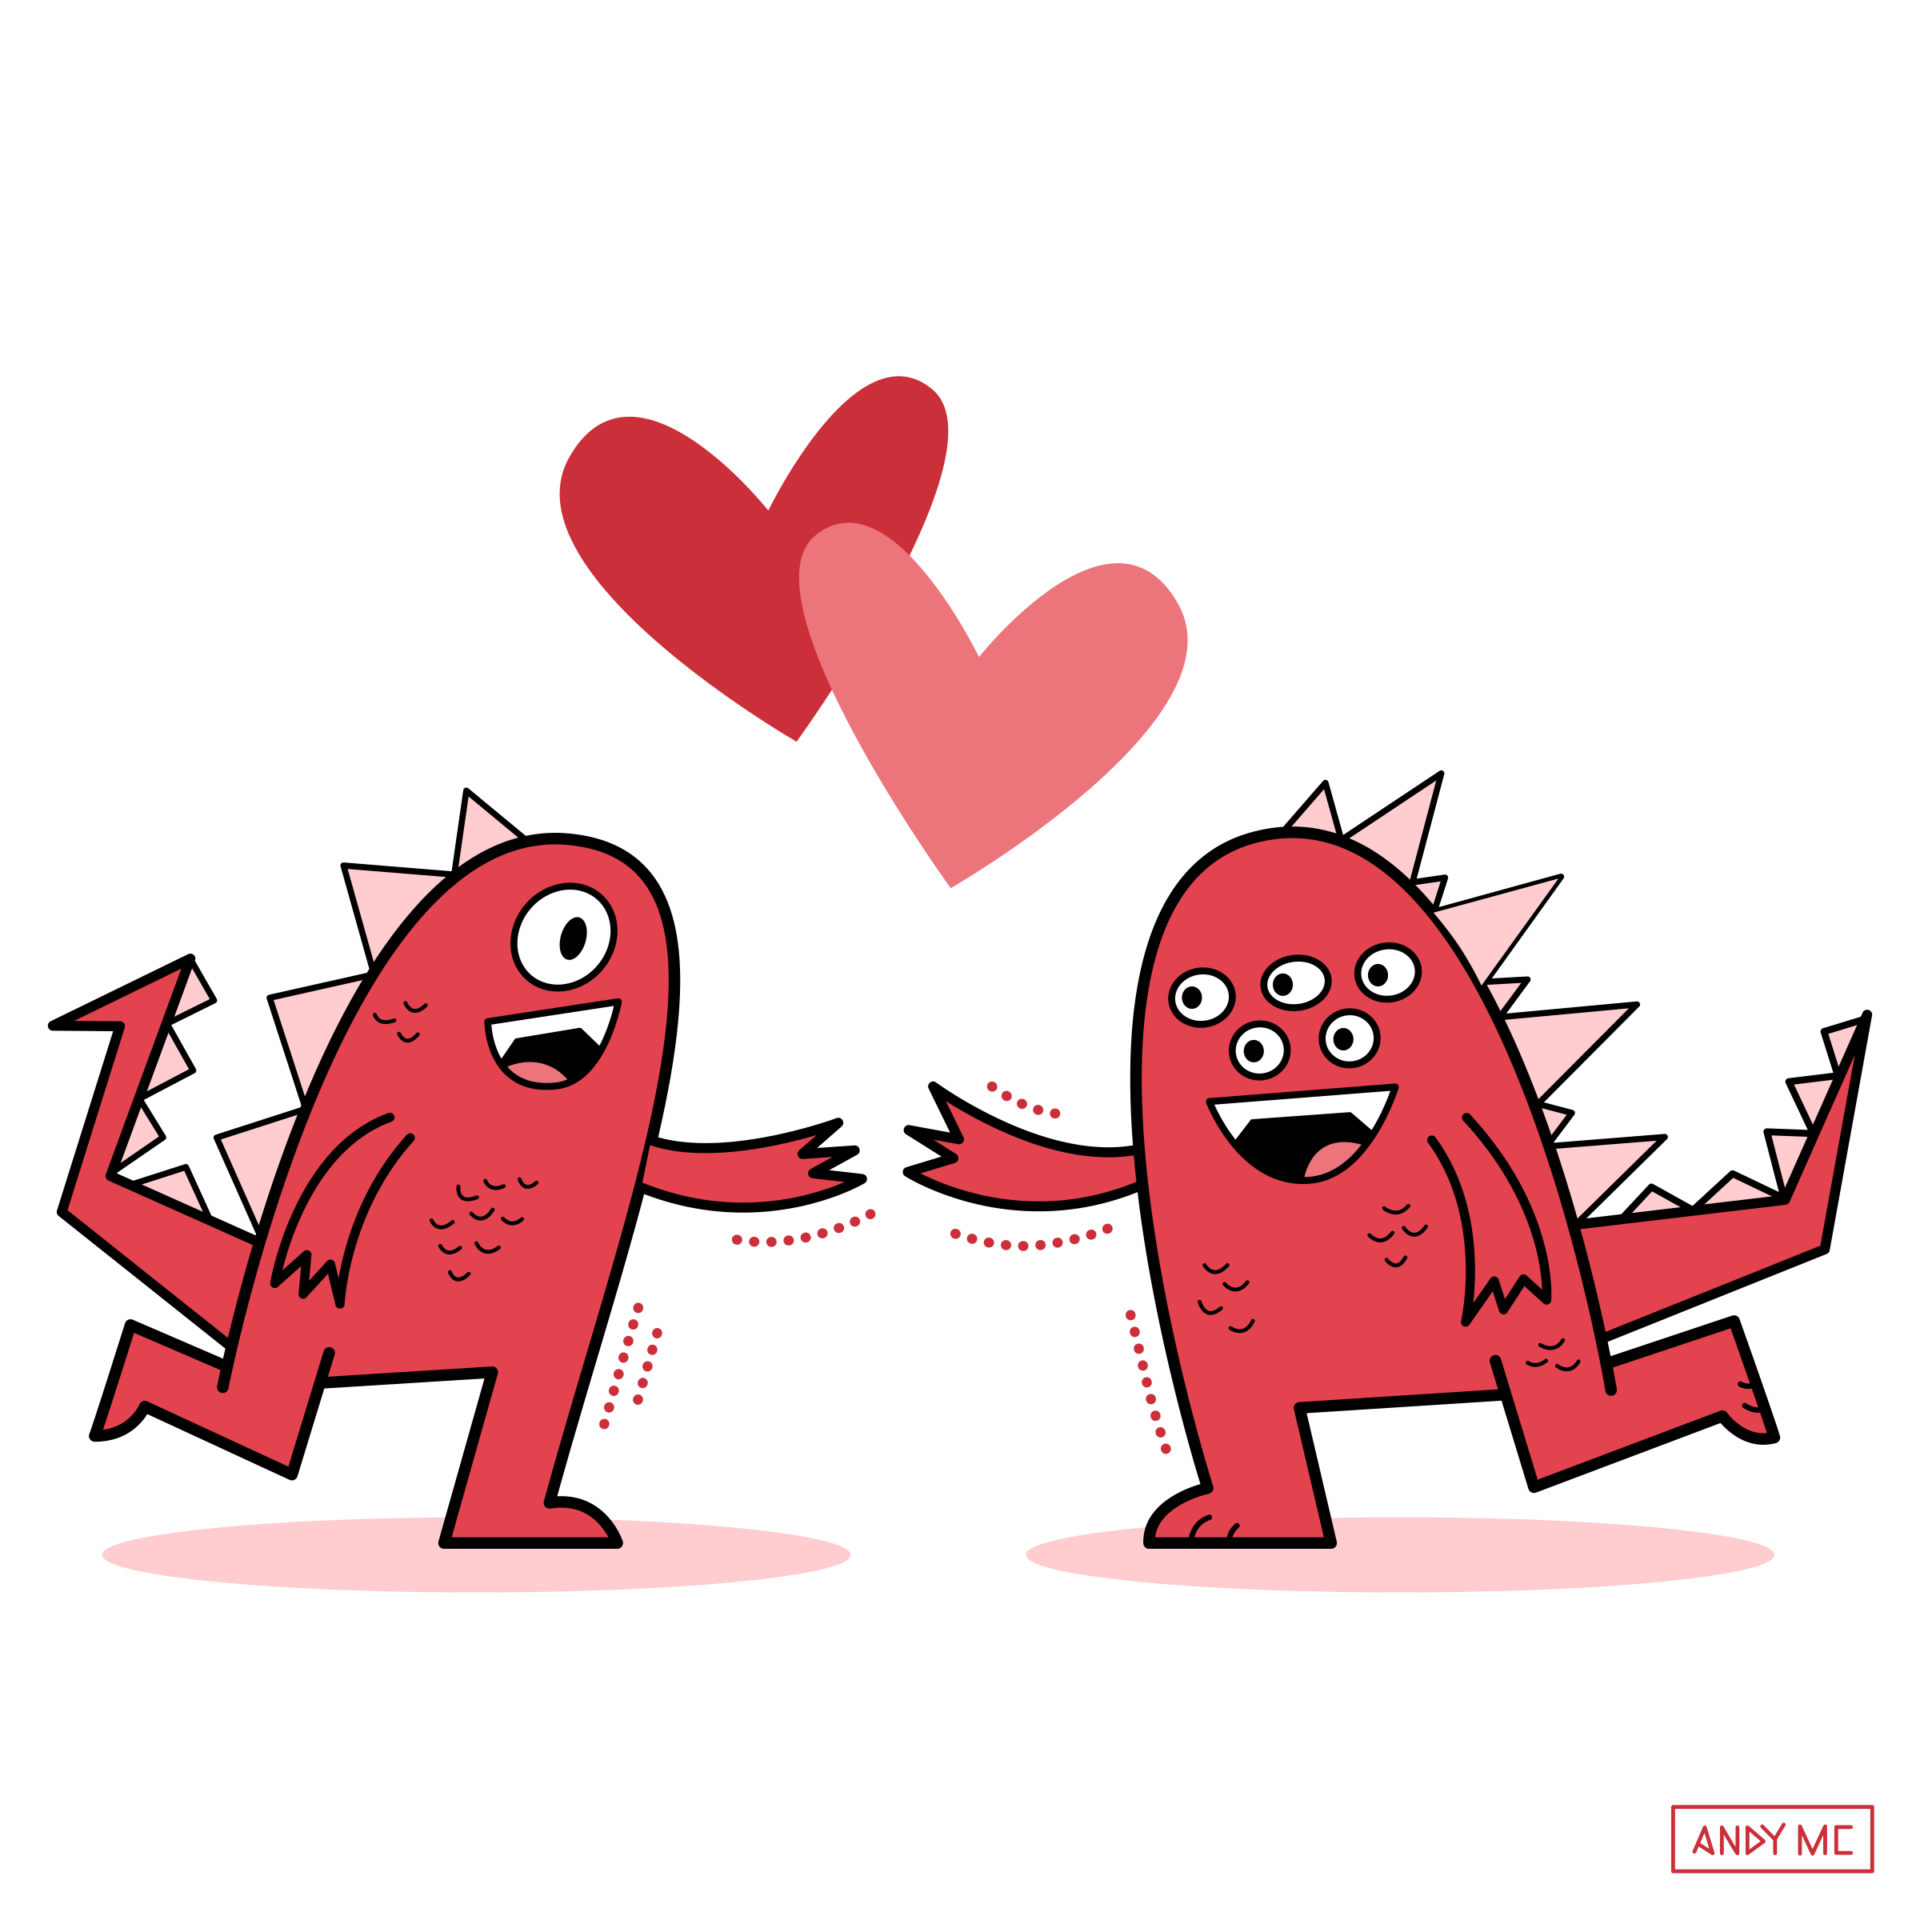 an illustration of cute monsters celebrating Valentine's Day